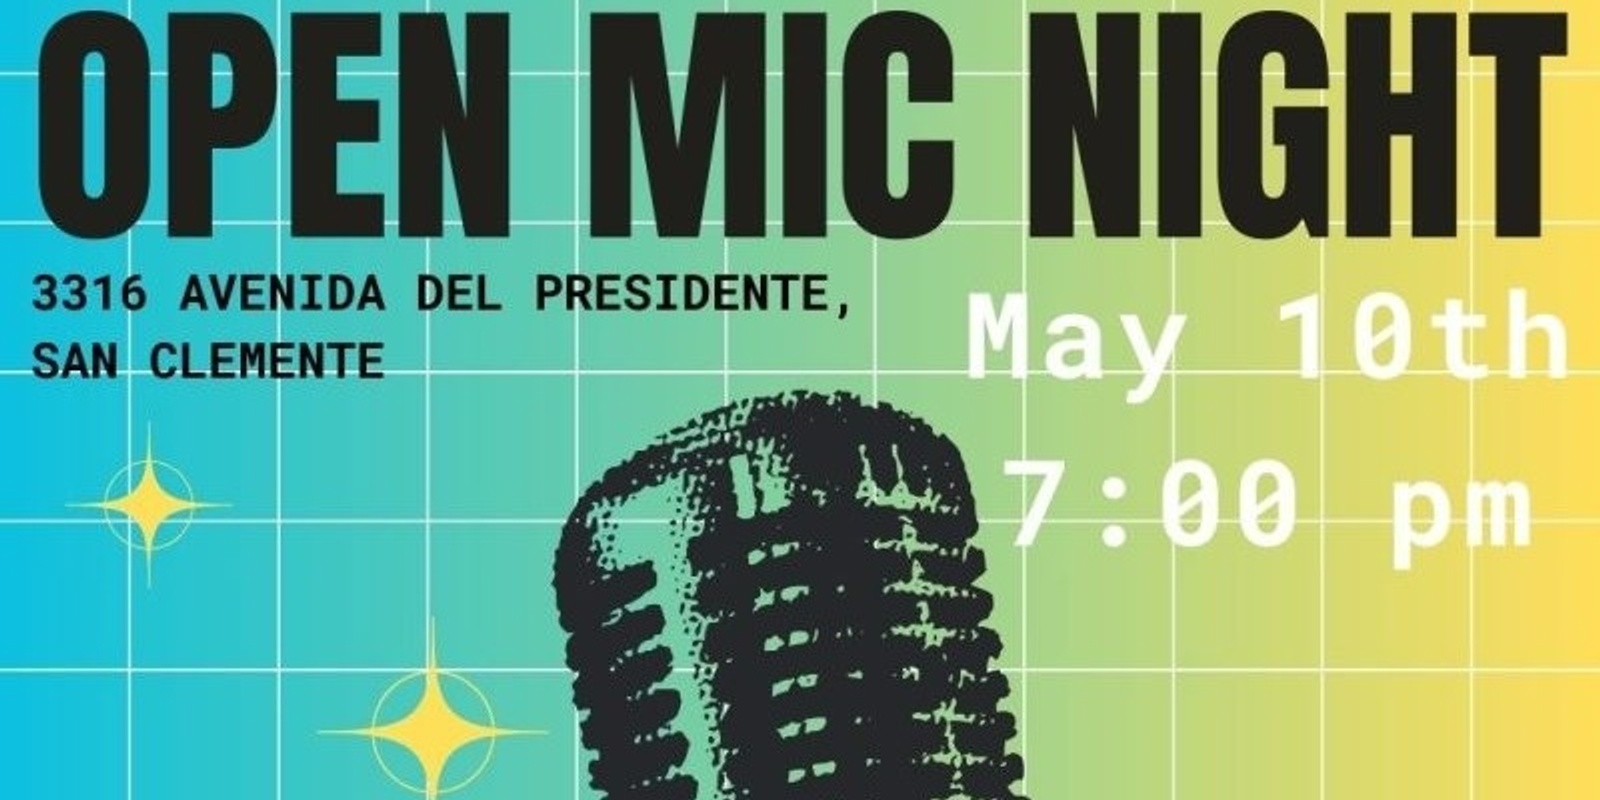 Banner image for COA Open Mic for Youth and Young Adults